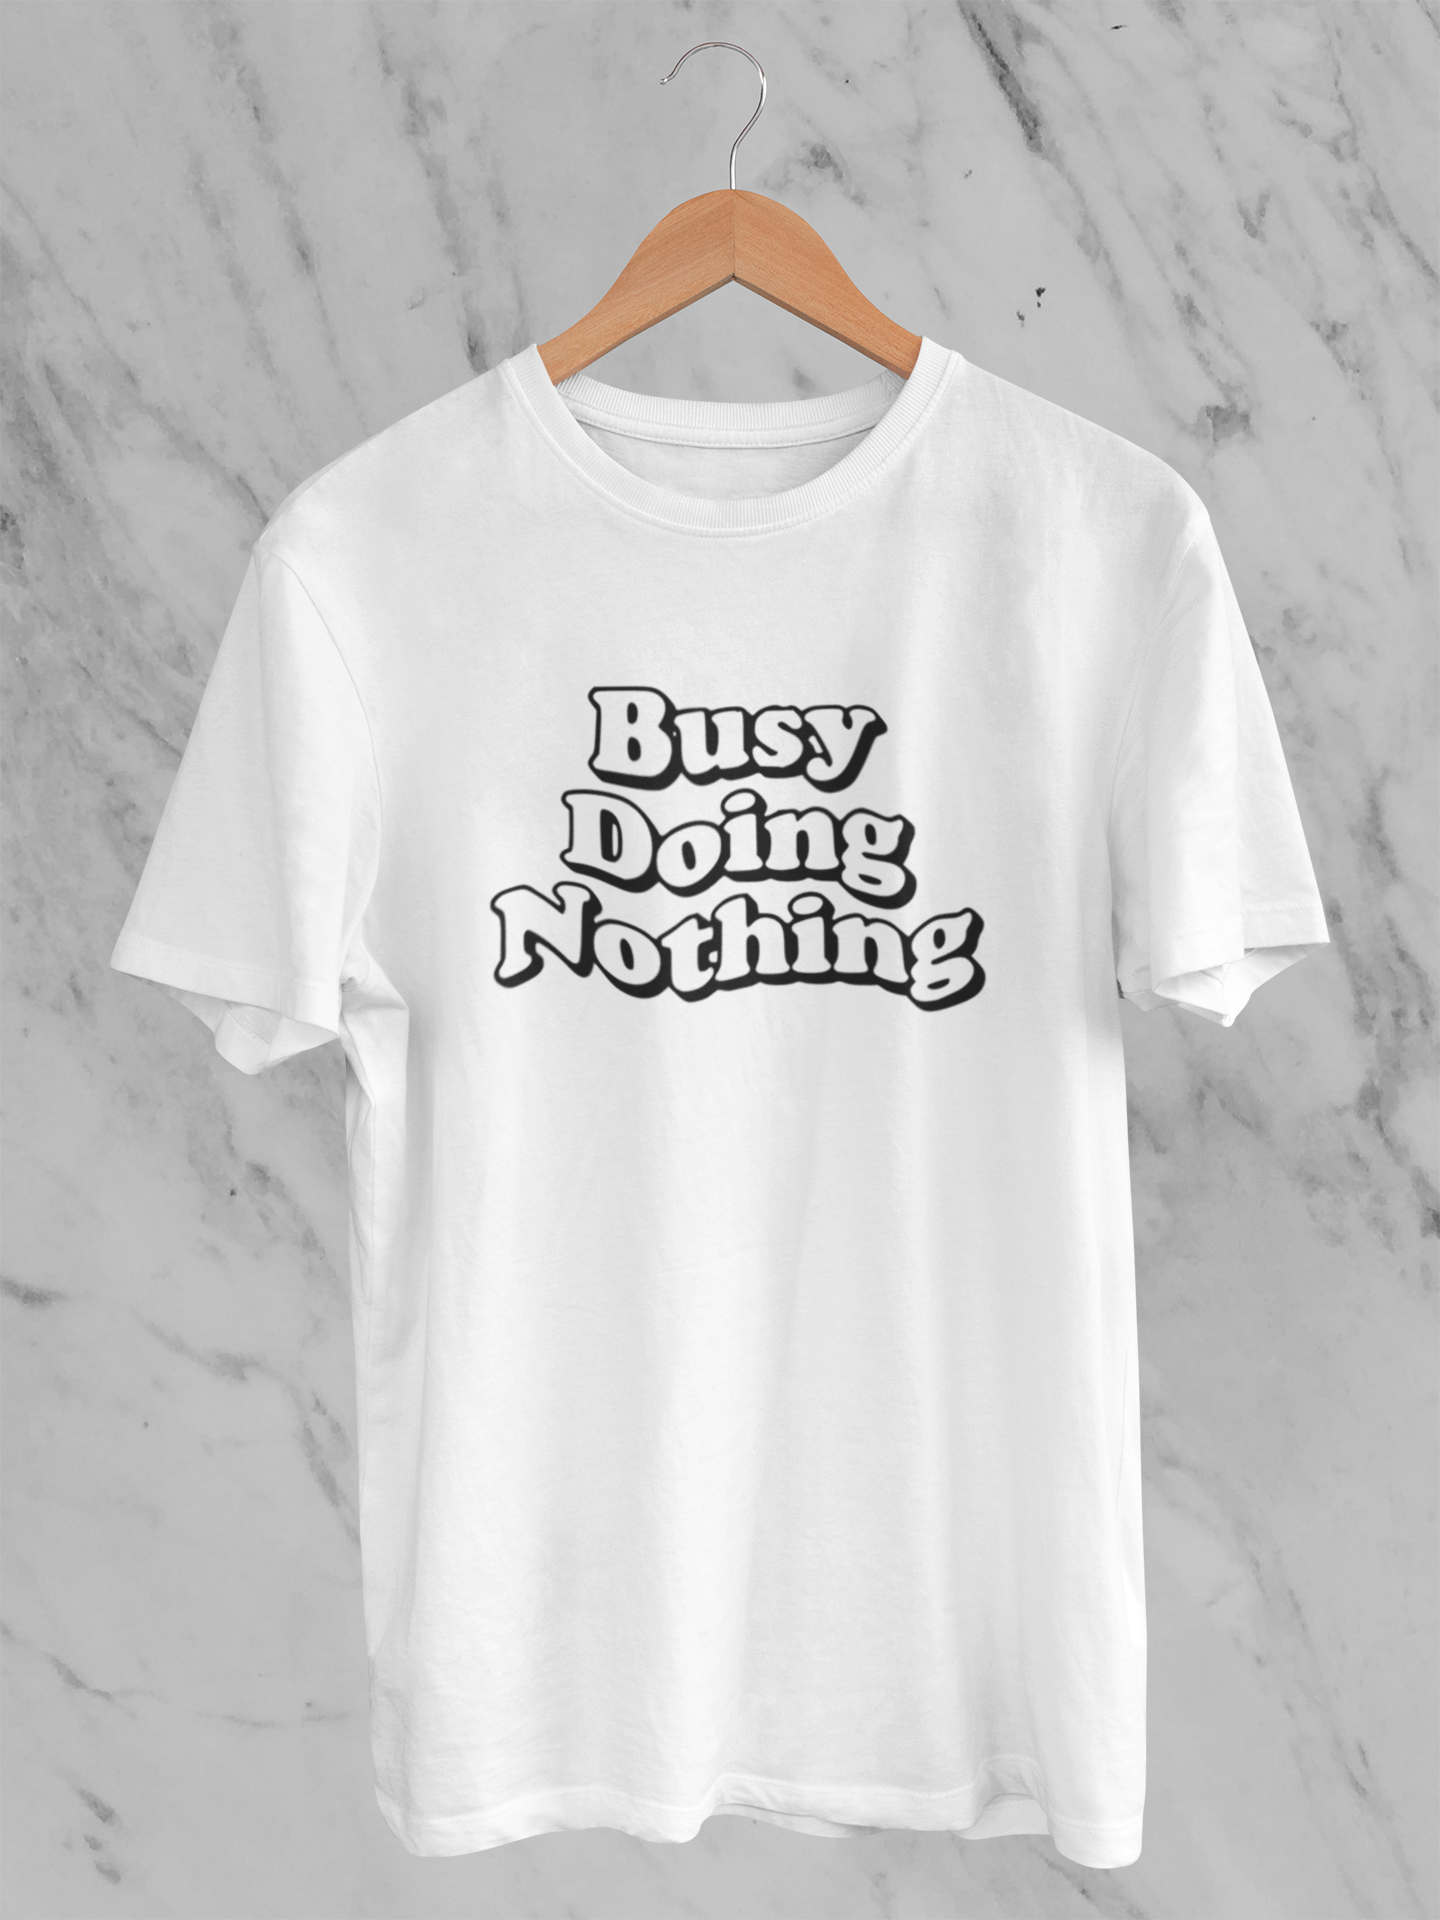 Busy doing nothing Tee